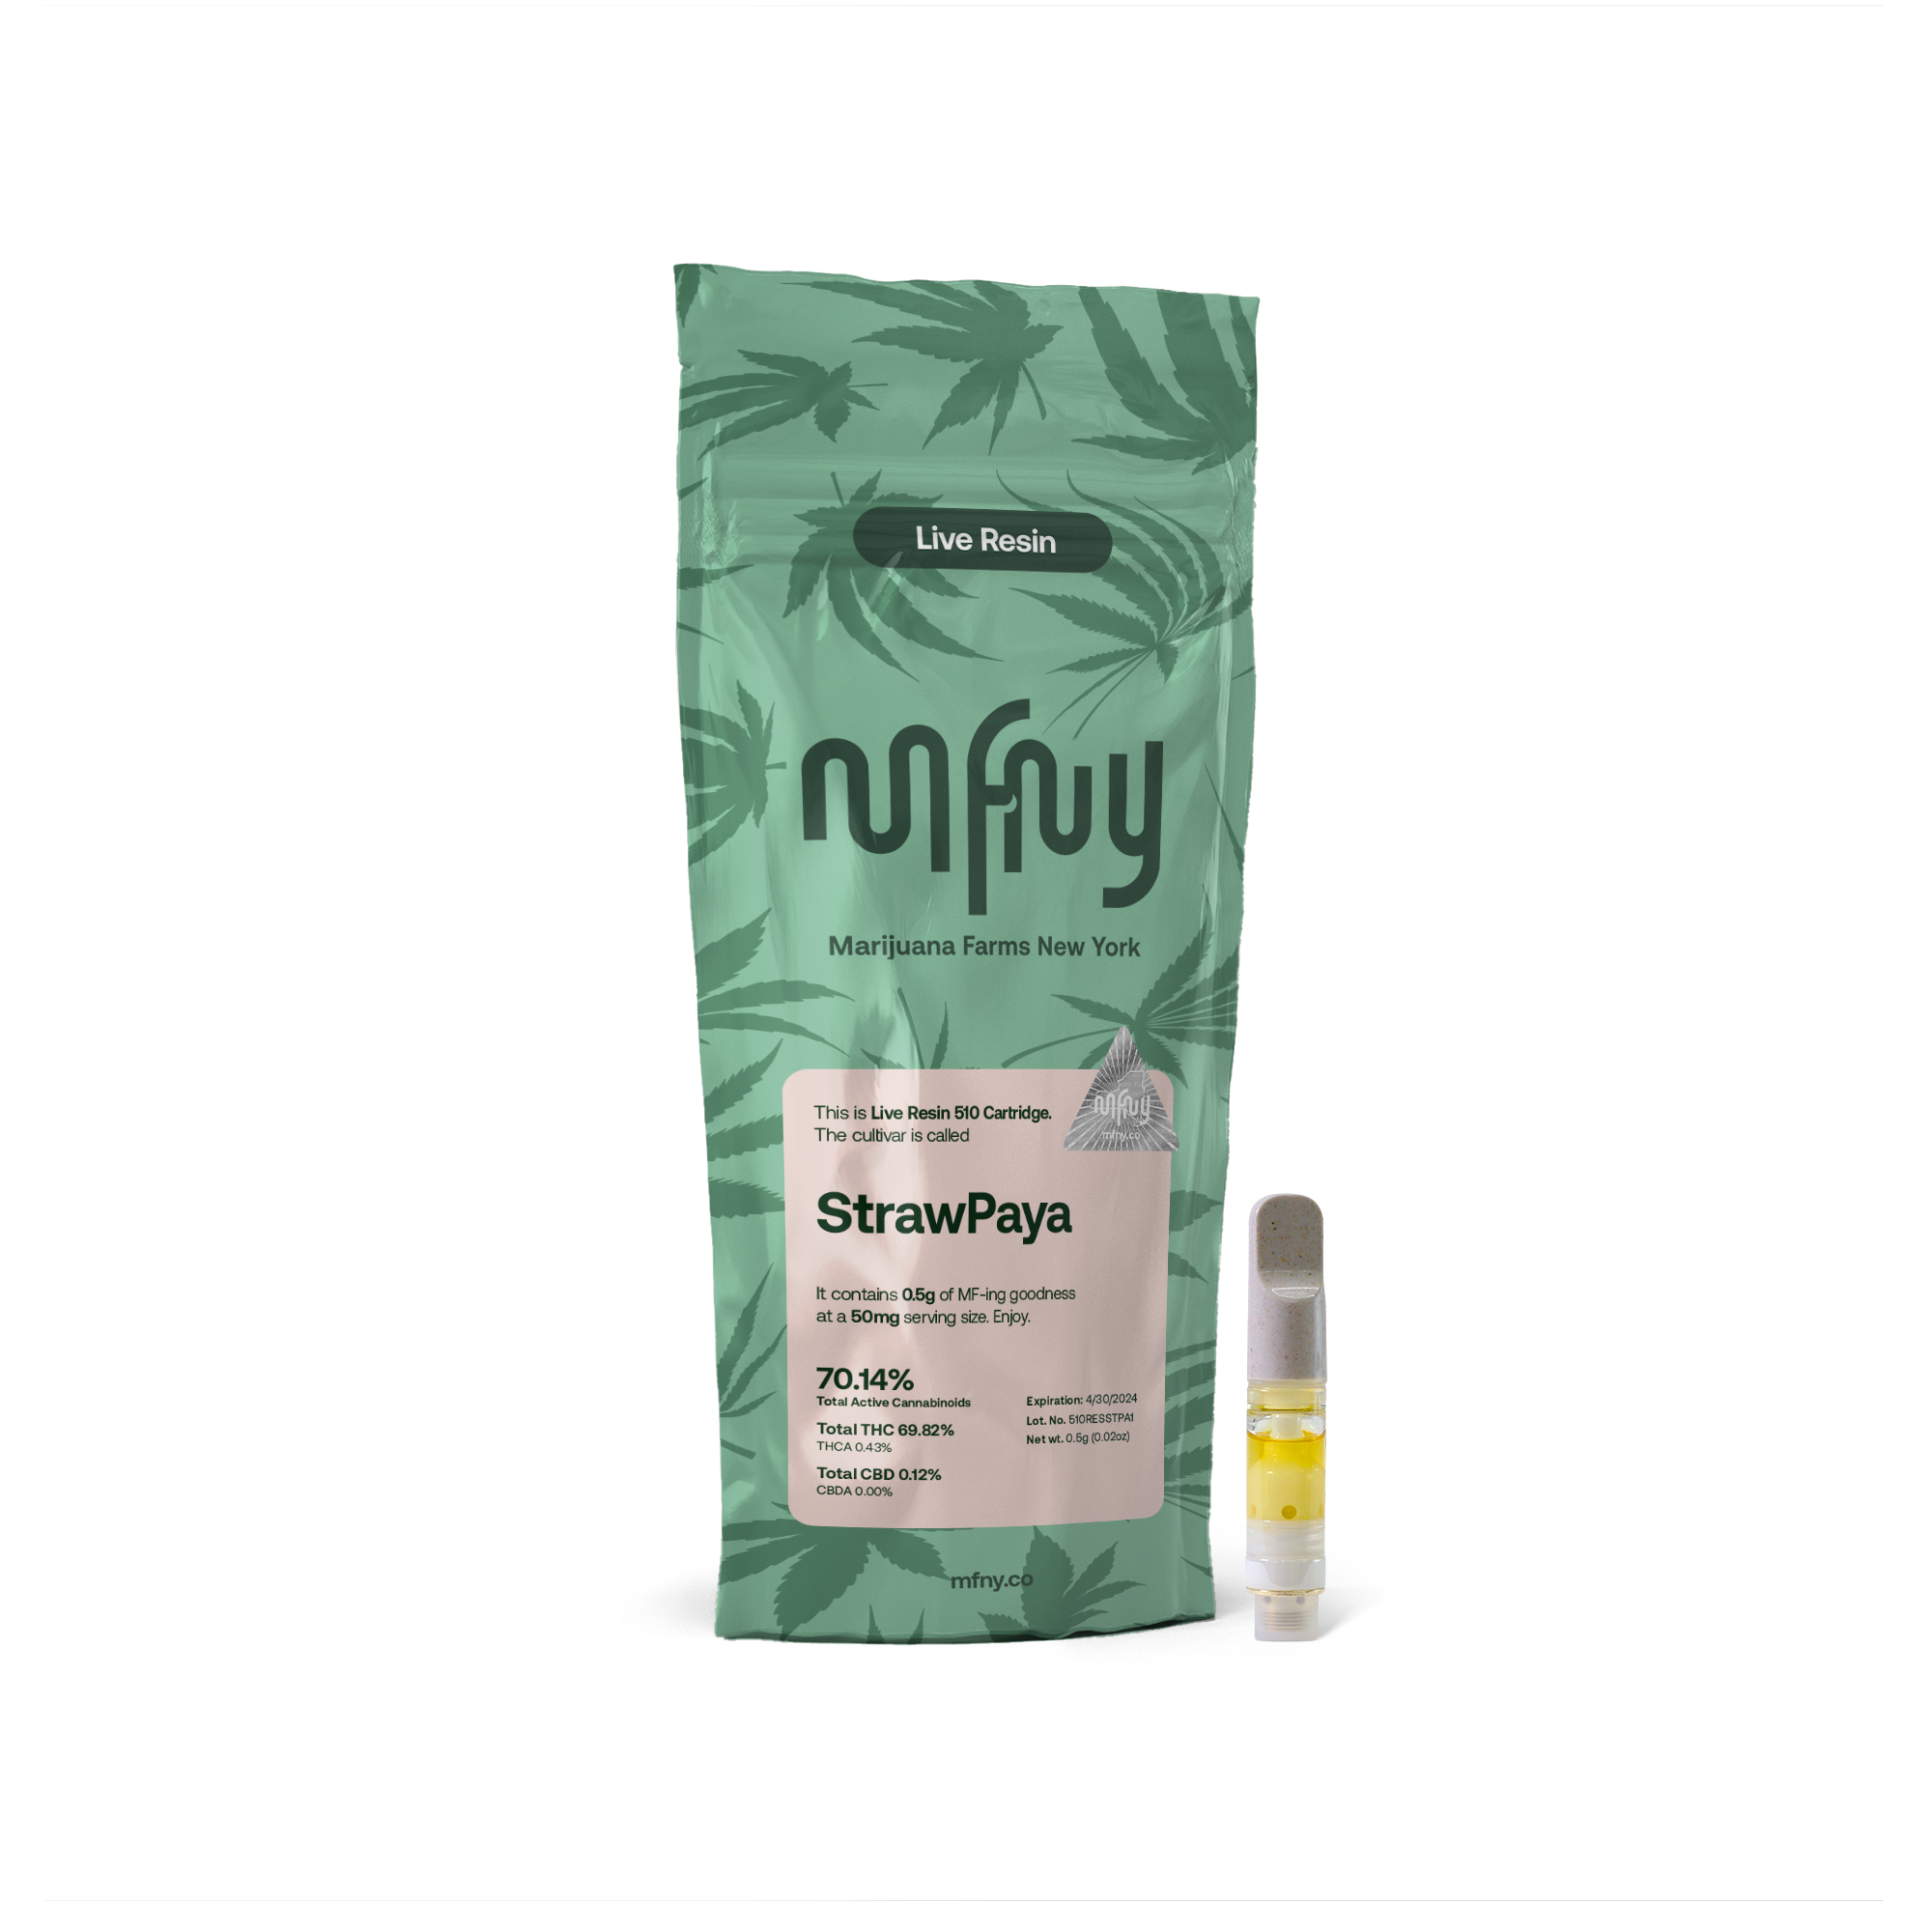 StrawPaya Live Resin • Cartridge • .5g - MFNY | Treehouse Cannabis - Weed delivery for New York